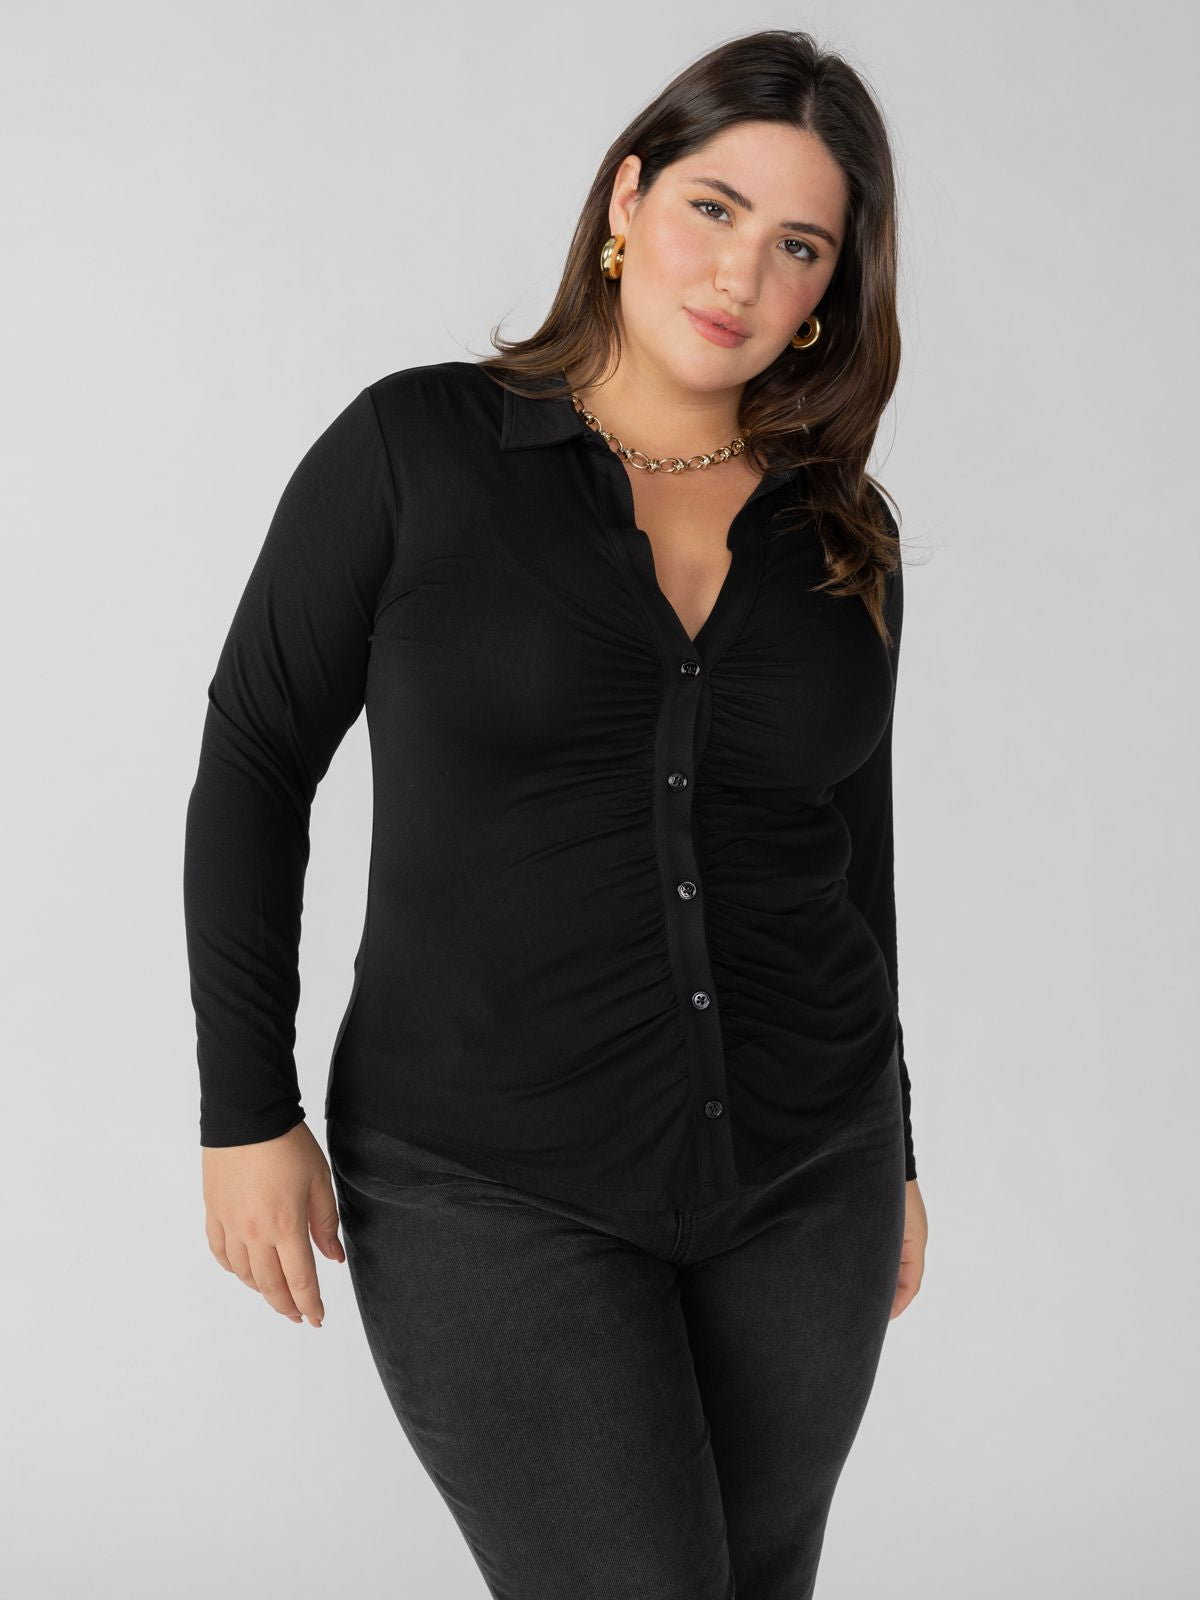 Dreamgirl Knit Button Up Top Black Inclusive Collection